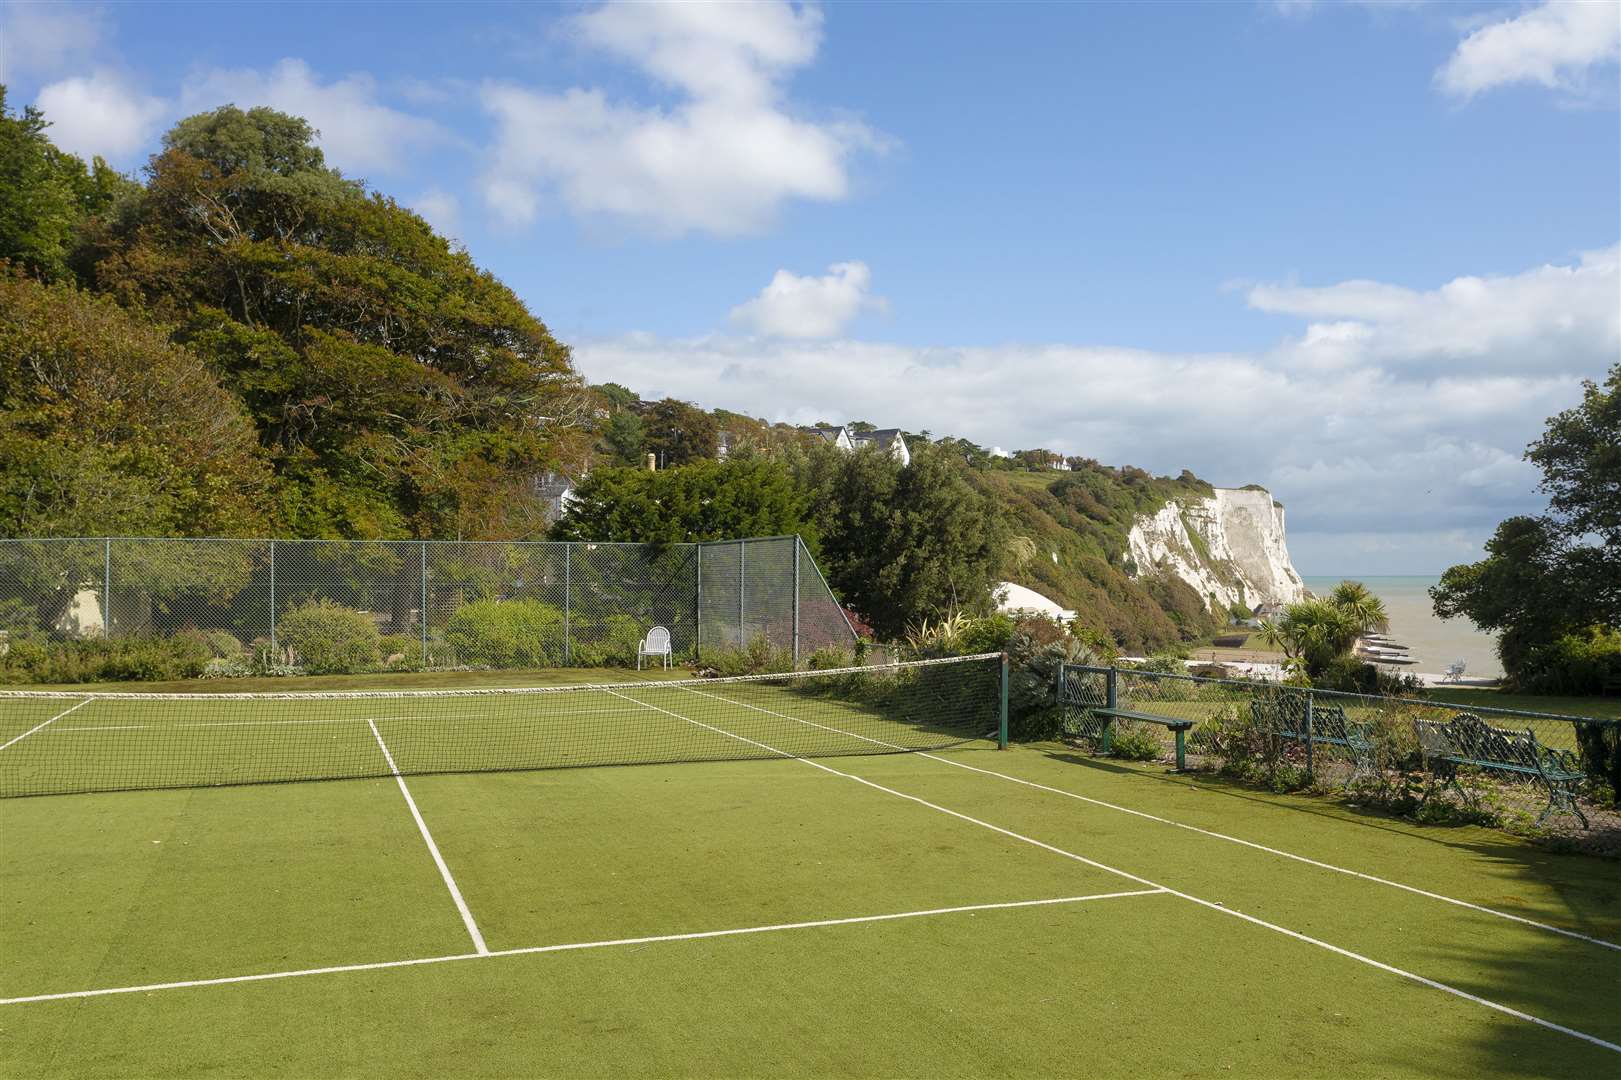 Don't get distracted by the view while playing tennis Picture: Strutt & Parker